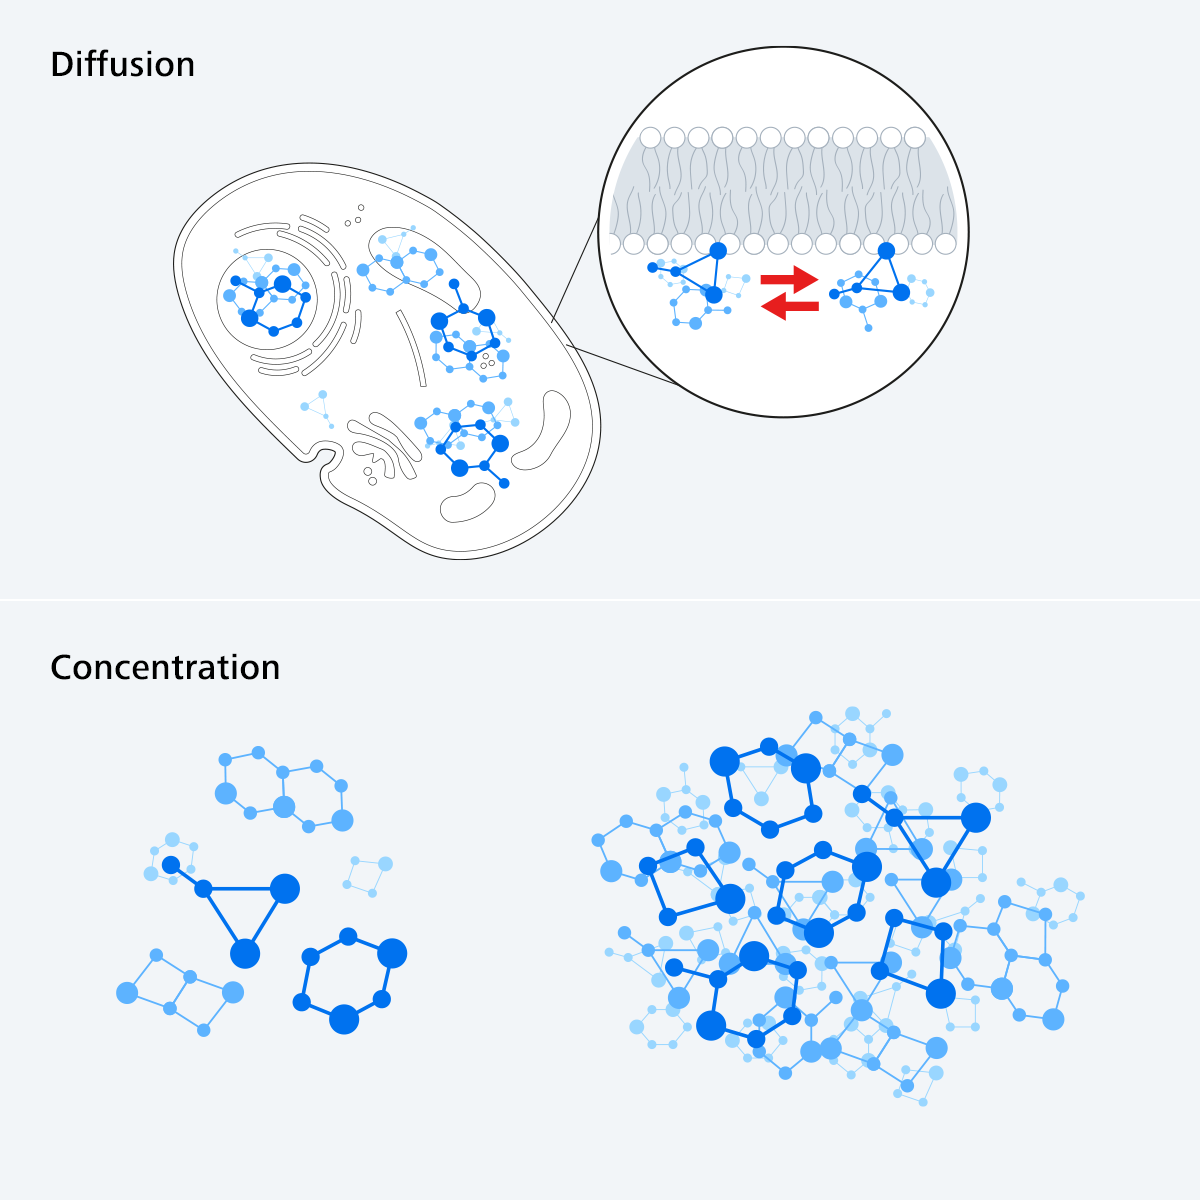 Figure 1: Extracting molecular dynamics such as diffusion and concentration from intensity-based images is key in understanding how proteins behave inside cellular environments